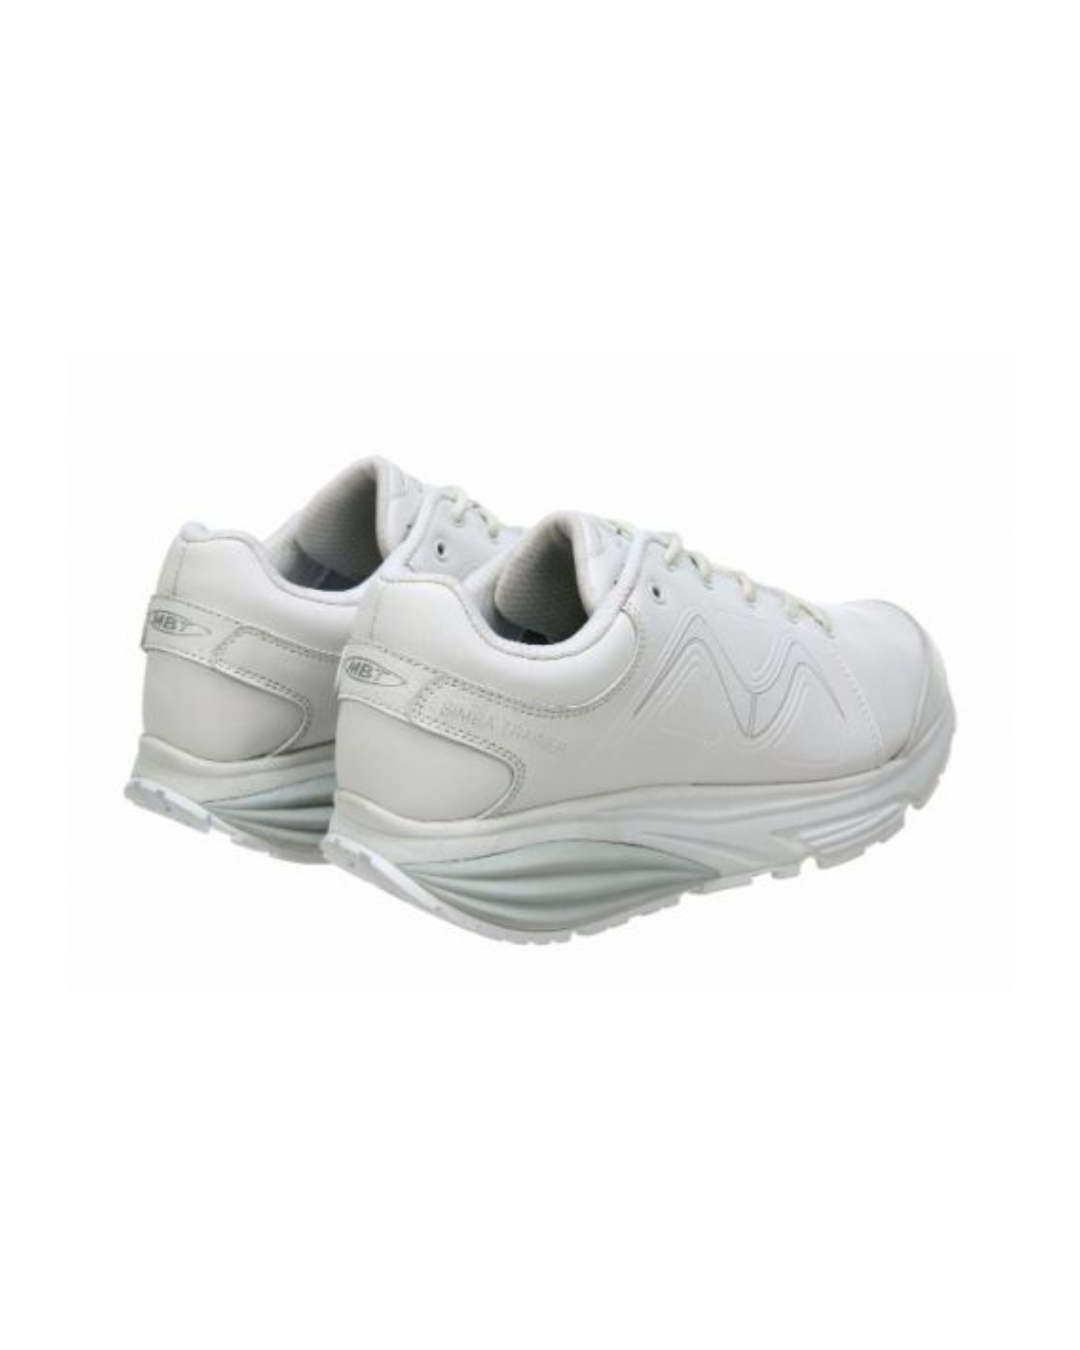 MBT Simba Trainer sneaker donna